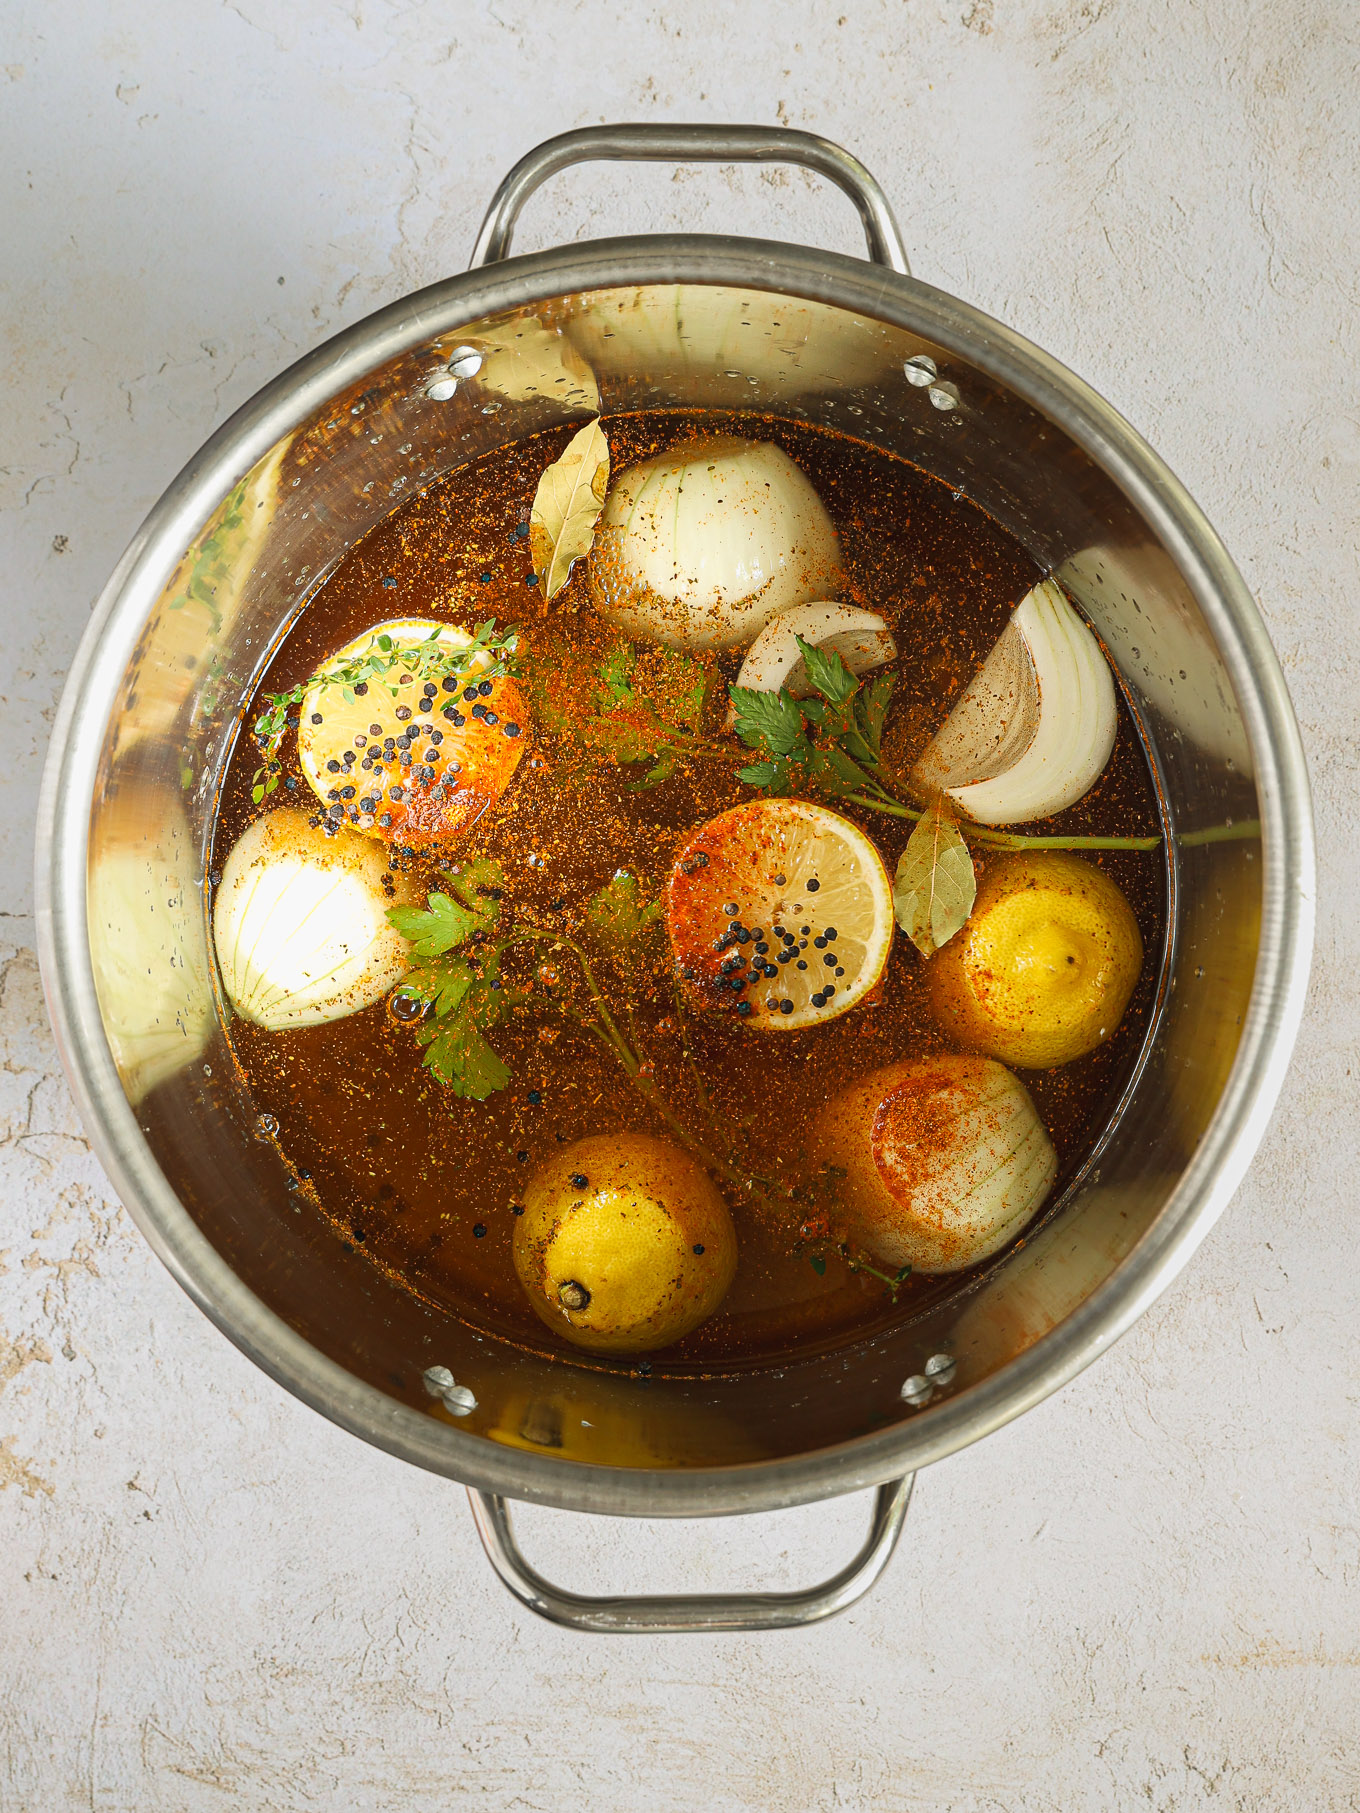 onions and lemons in broth with spices.